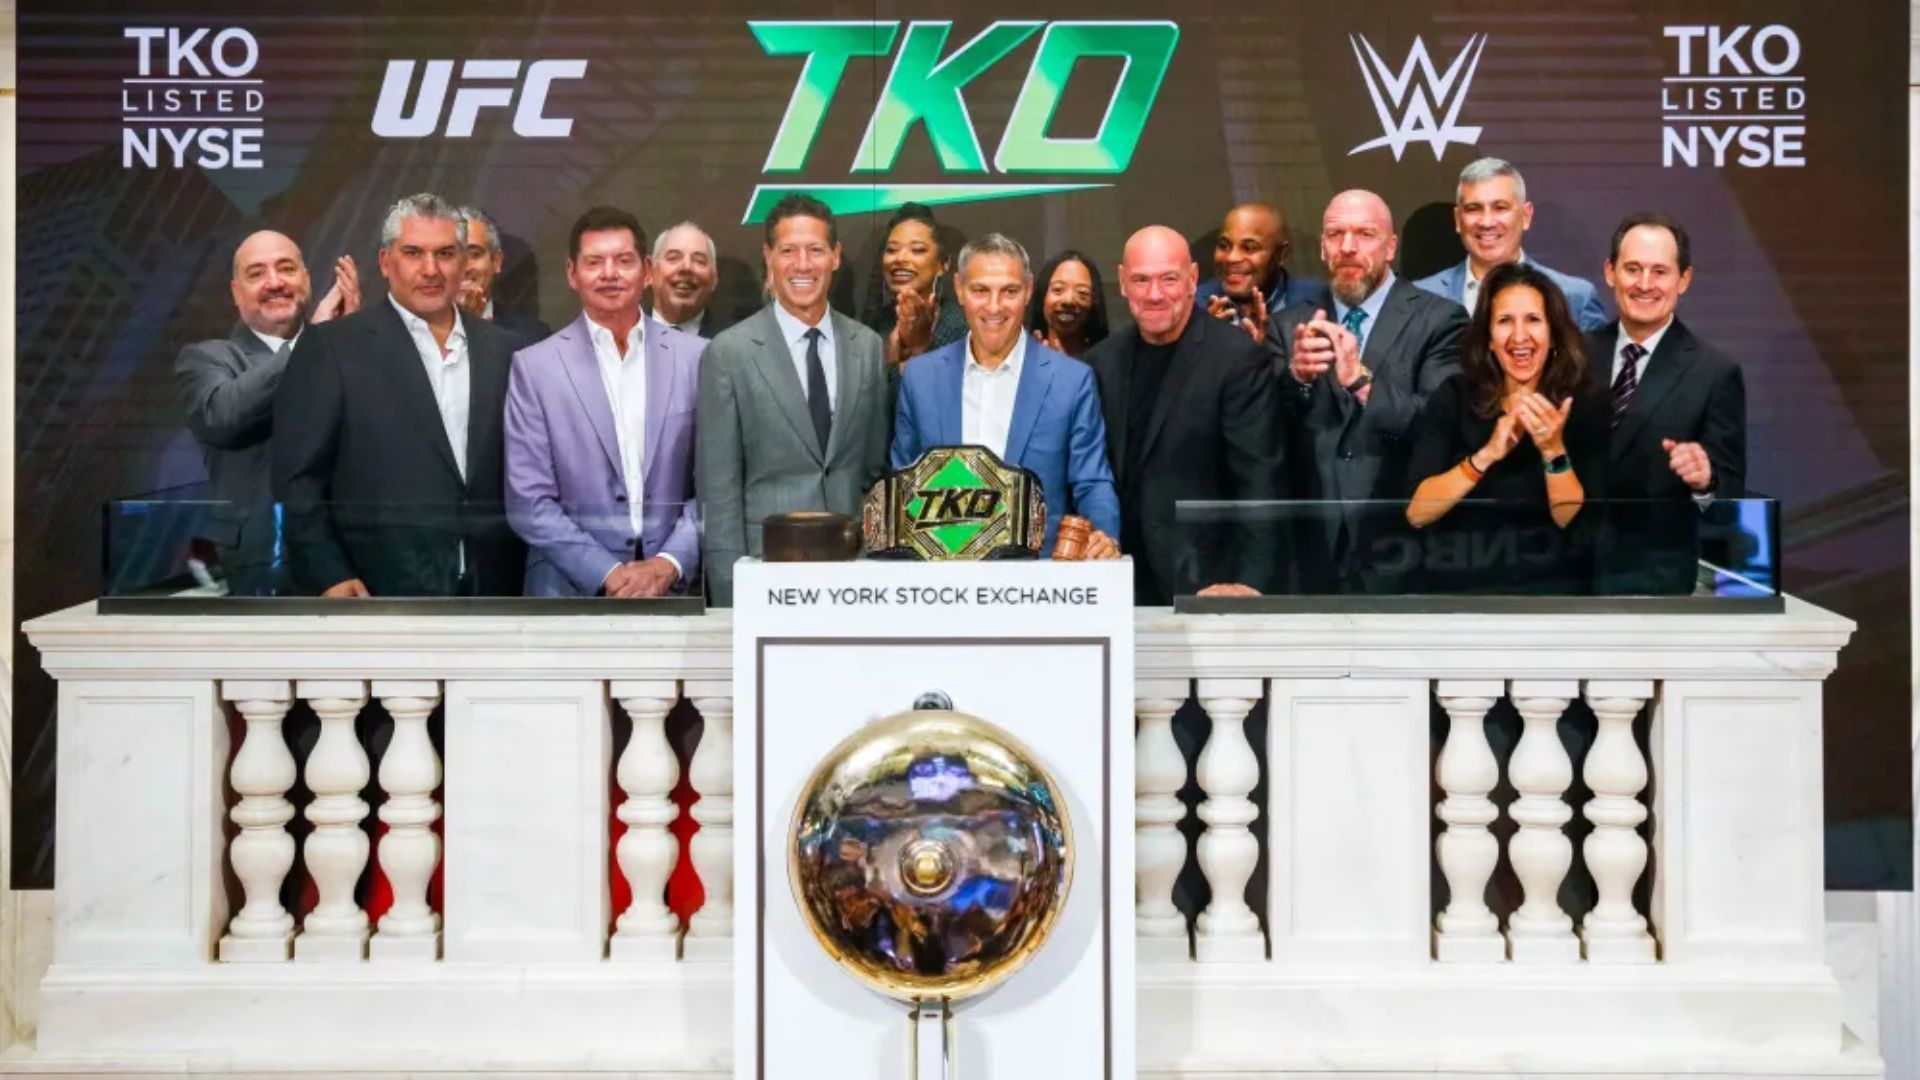 WWE and UFC has officially merged.